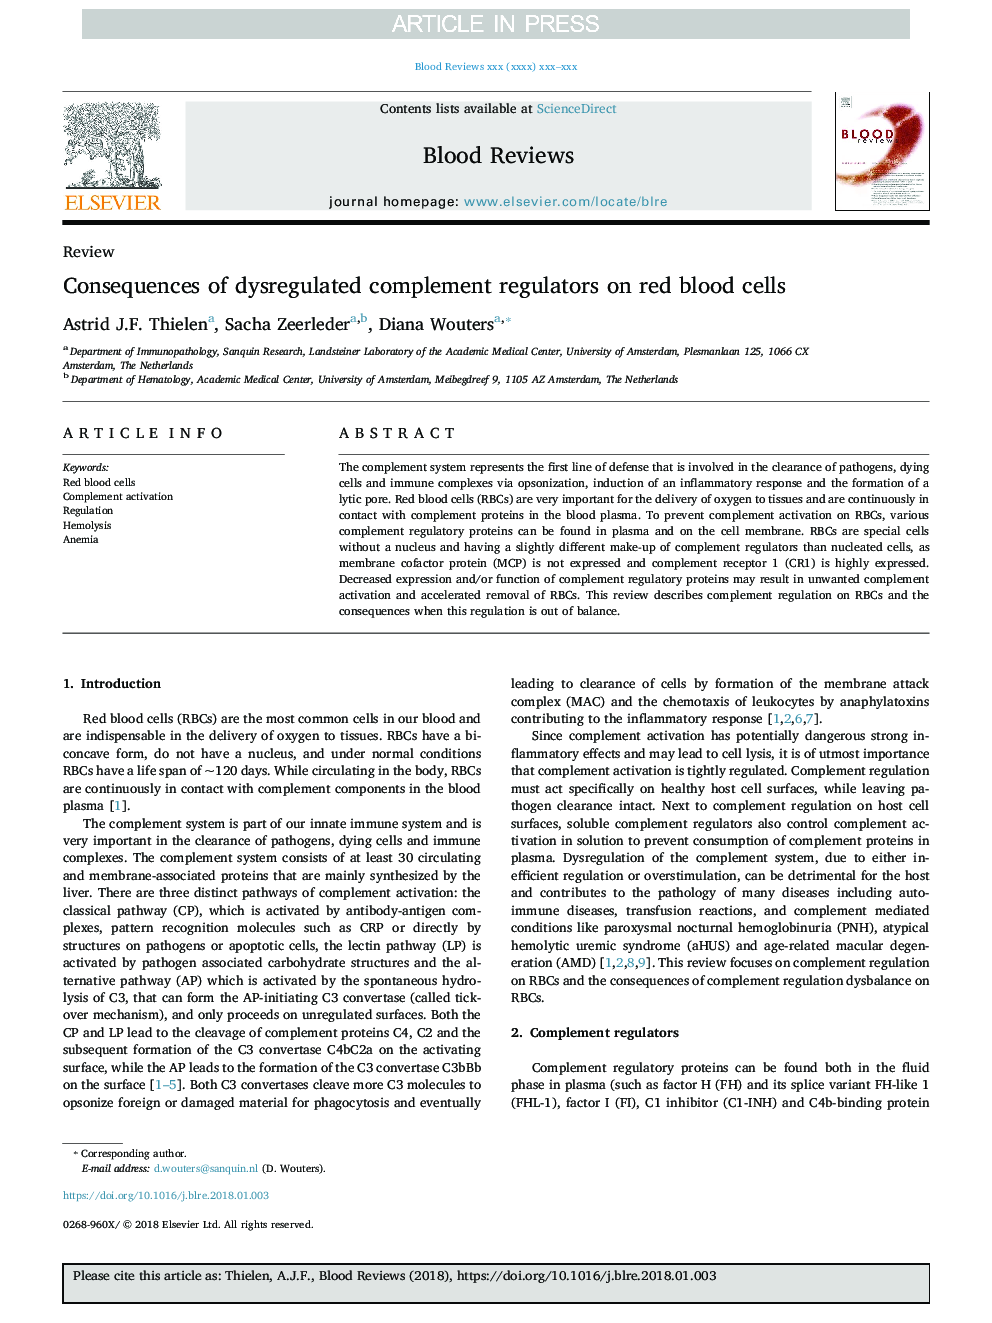 Consequences of dysregulated complement regulators on red blood cells